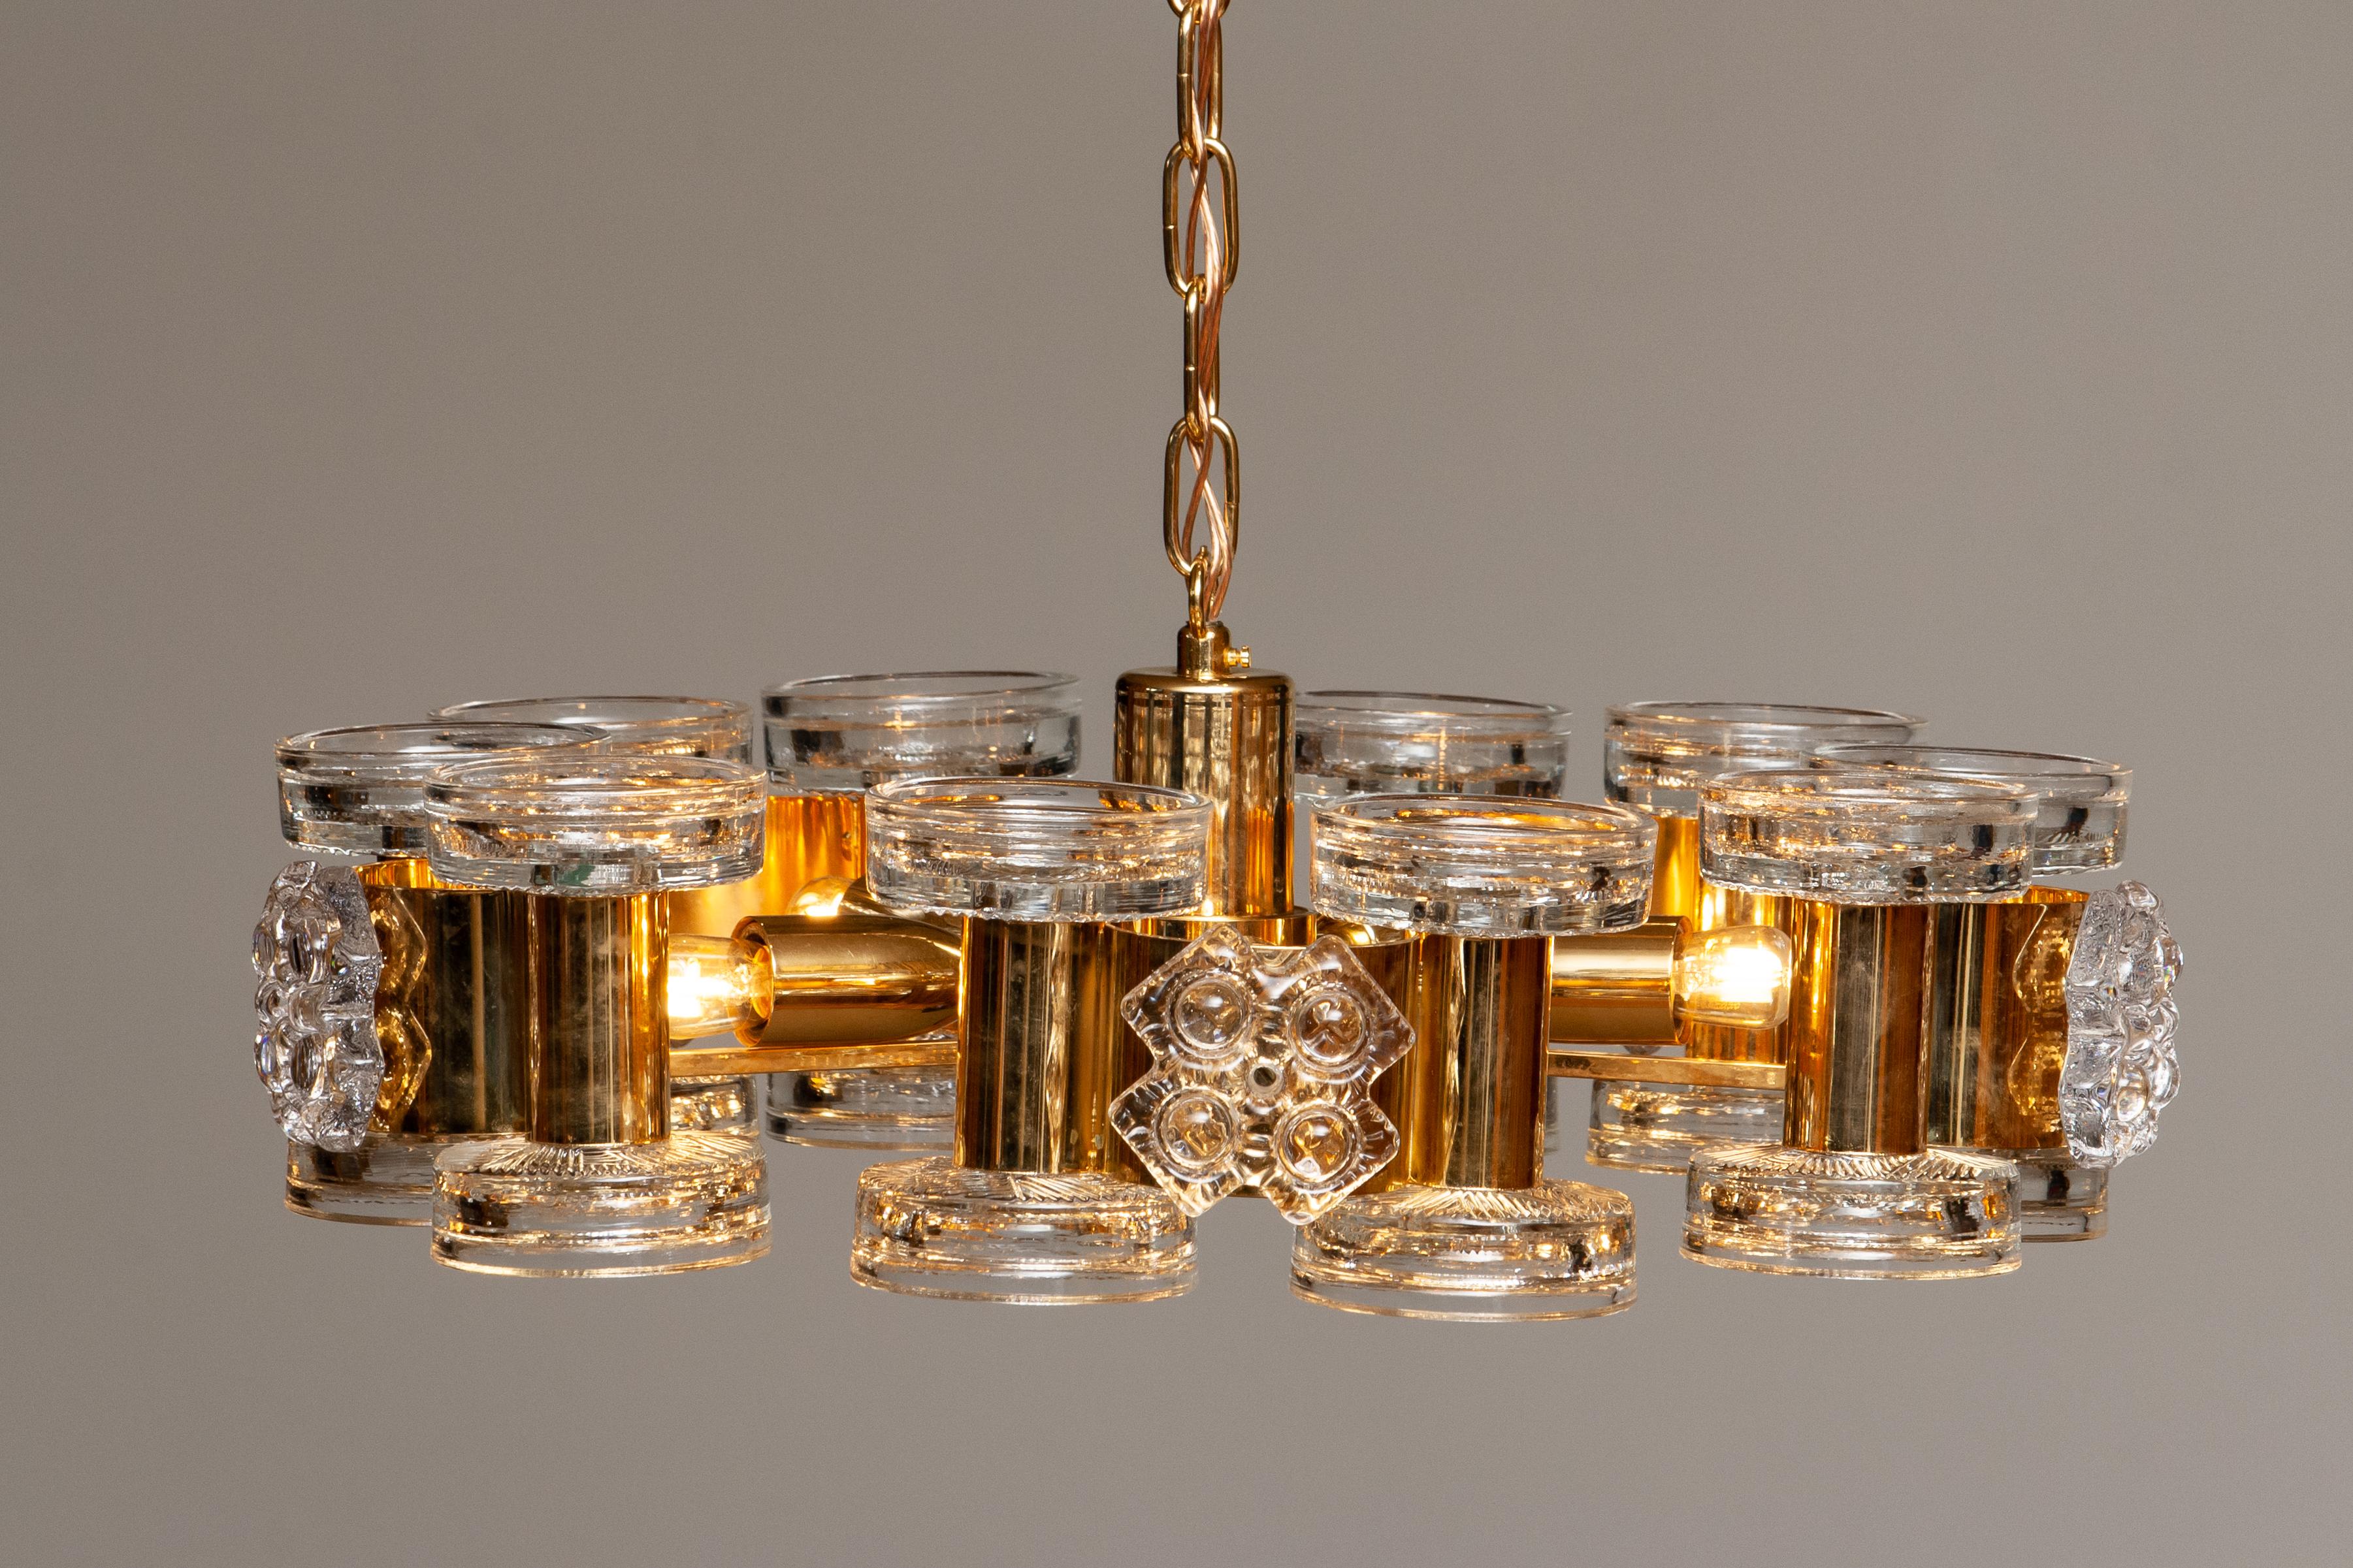 Brass 1970s Gilded Chandelier with Ten Candlesticks and Five Screw Bulbs by Orrefors